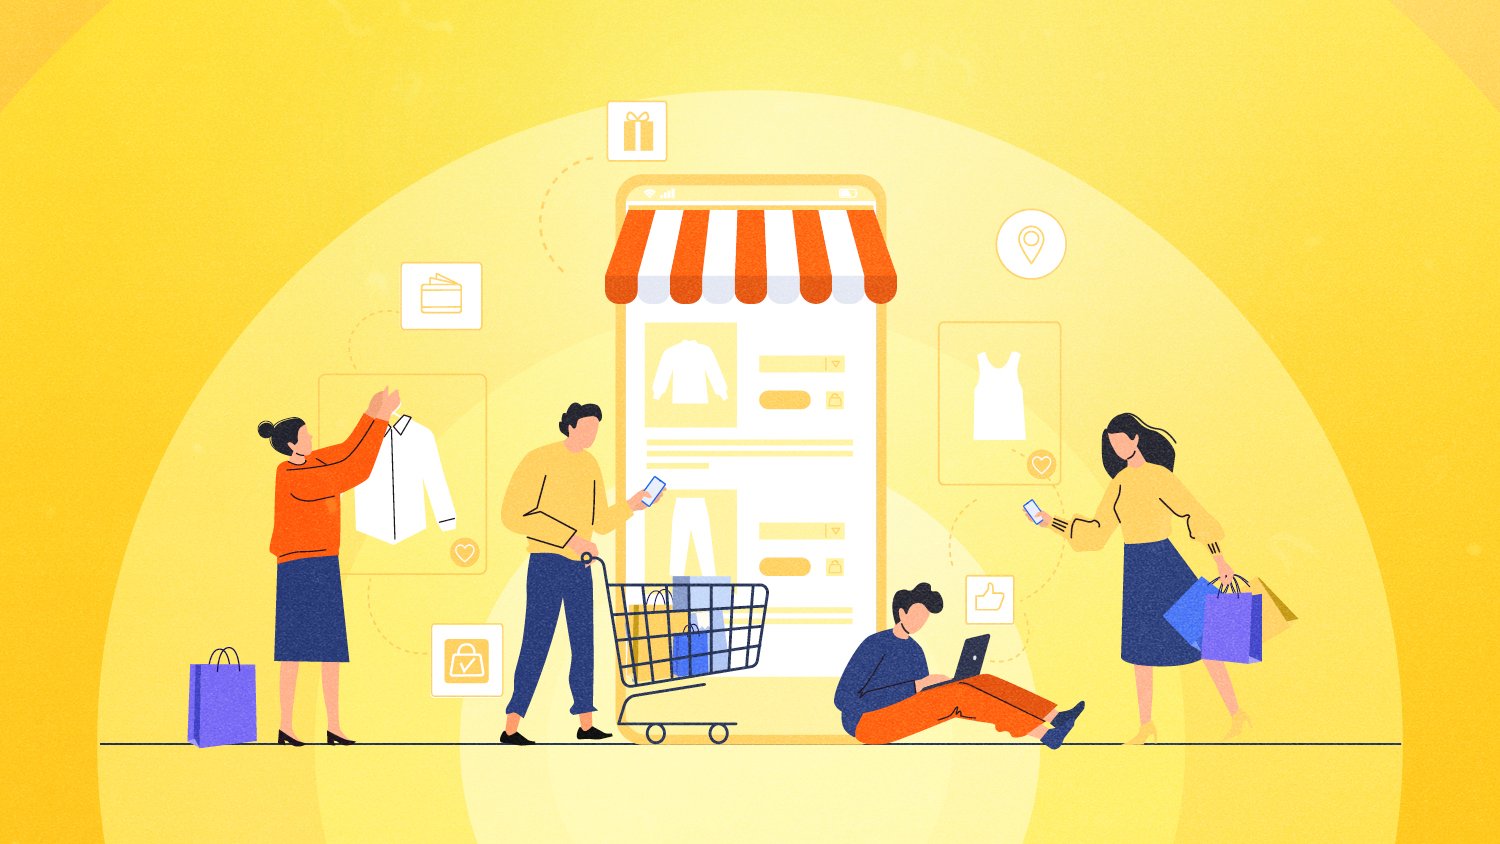 5 CONSUMER TRENDS MARKETERS SHOULD WATCH OUT FOR IN 2022